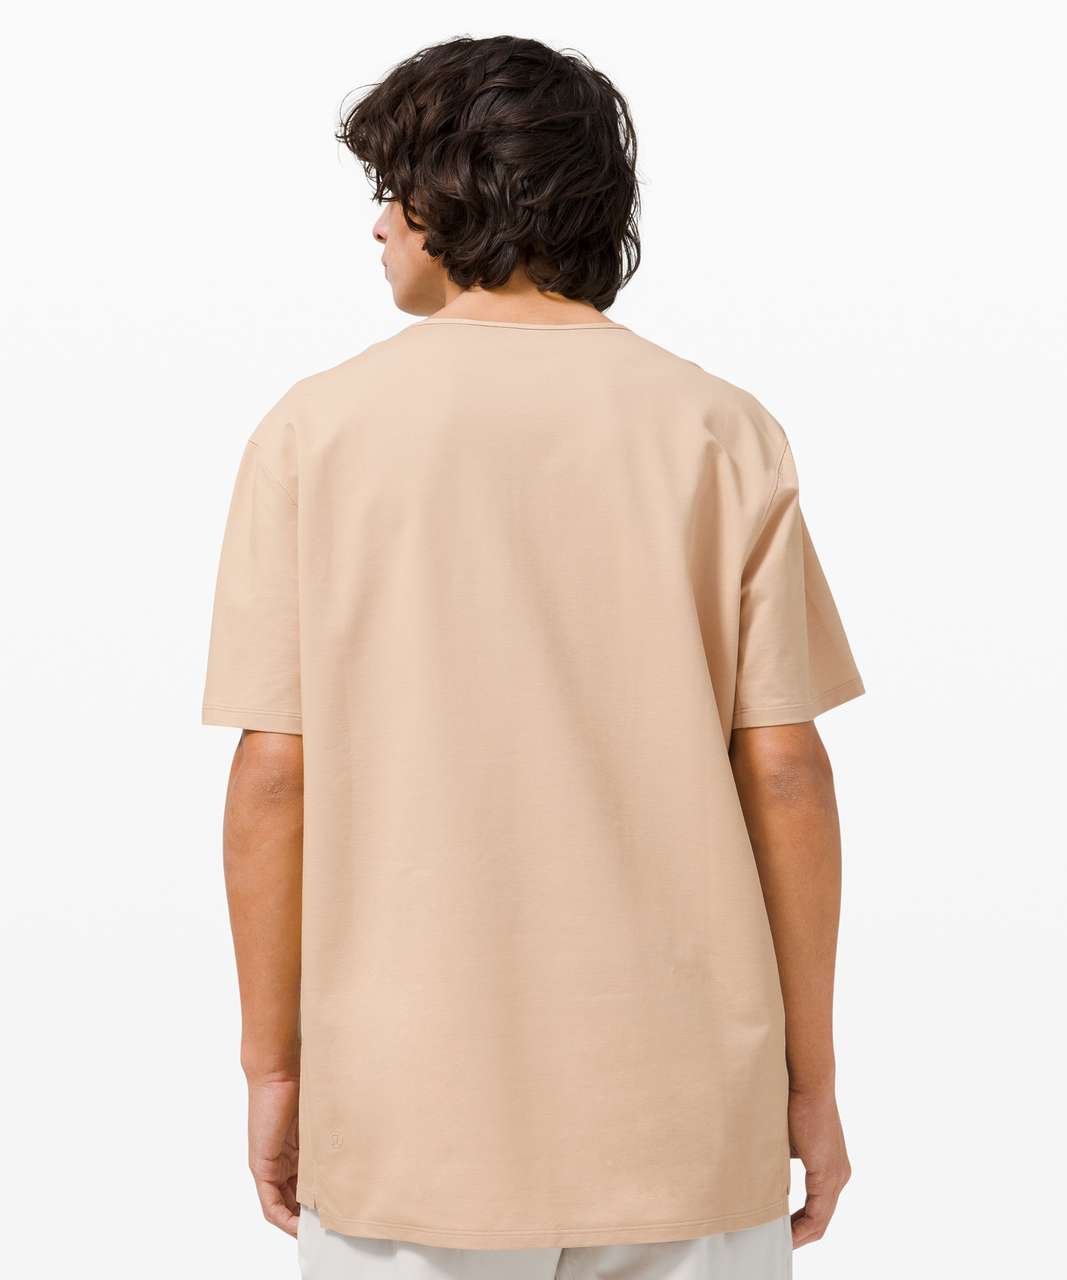 Lululemon Chest Pocket Relaxed Fit Tee *Oxford - White / Cafe Au Lait